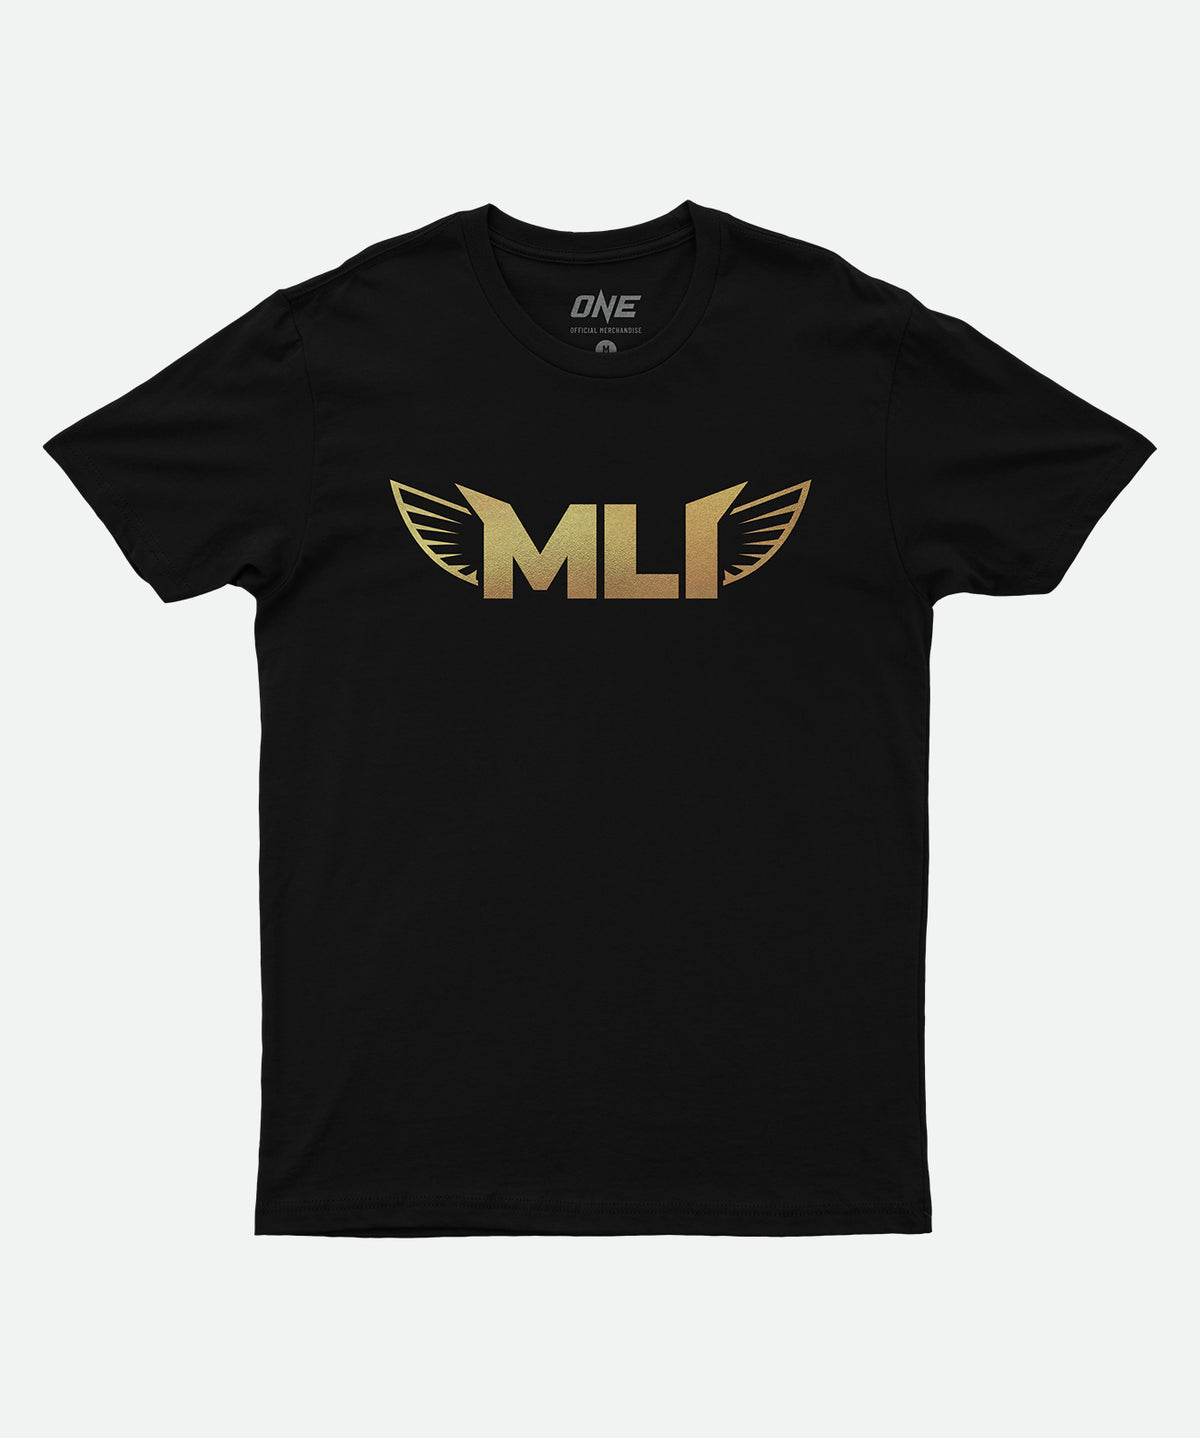 ONE Esports x MLI Black Tee - ONE.SHOP | The Official Online Shop of ONE Championship